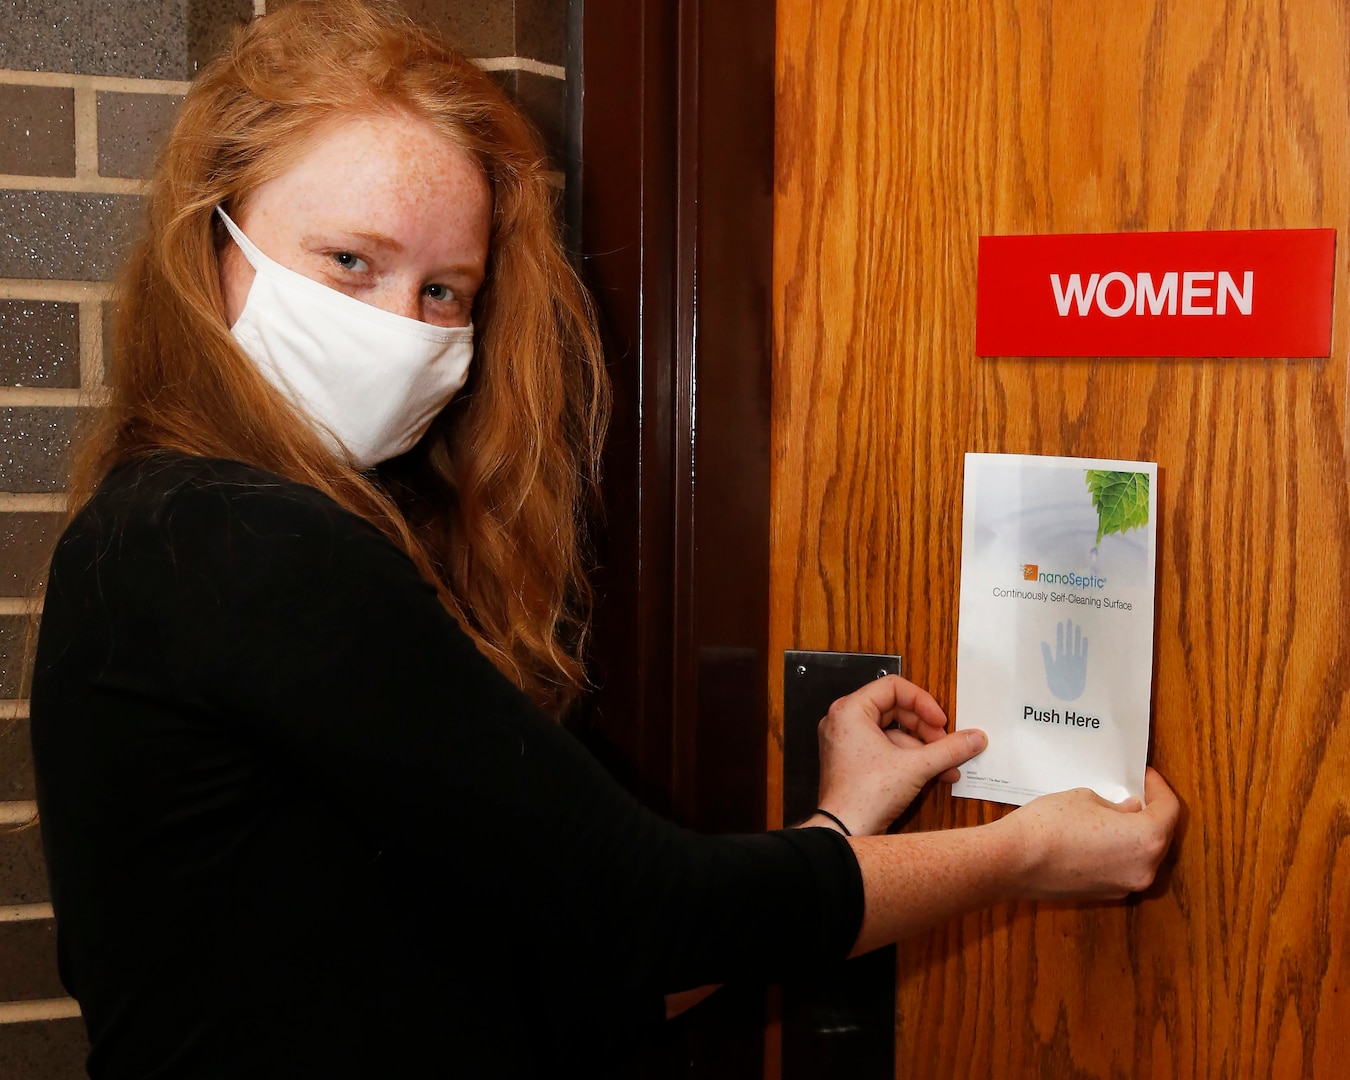 Nuclear Engineer (Code 2310.4) Cynthia Raines applies a NanoSeptic Protective Sheet to the high-touch area of a women’s bathroom door in Bldg. 1500 at Norfolk Naval Shipyard.